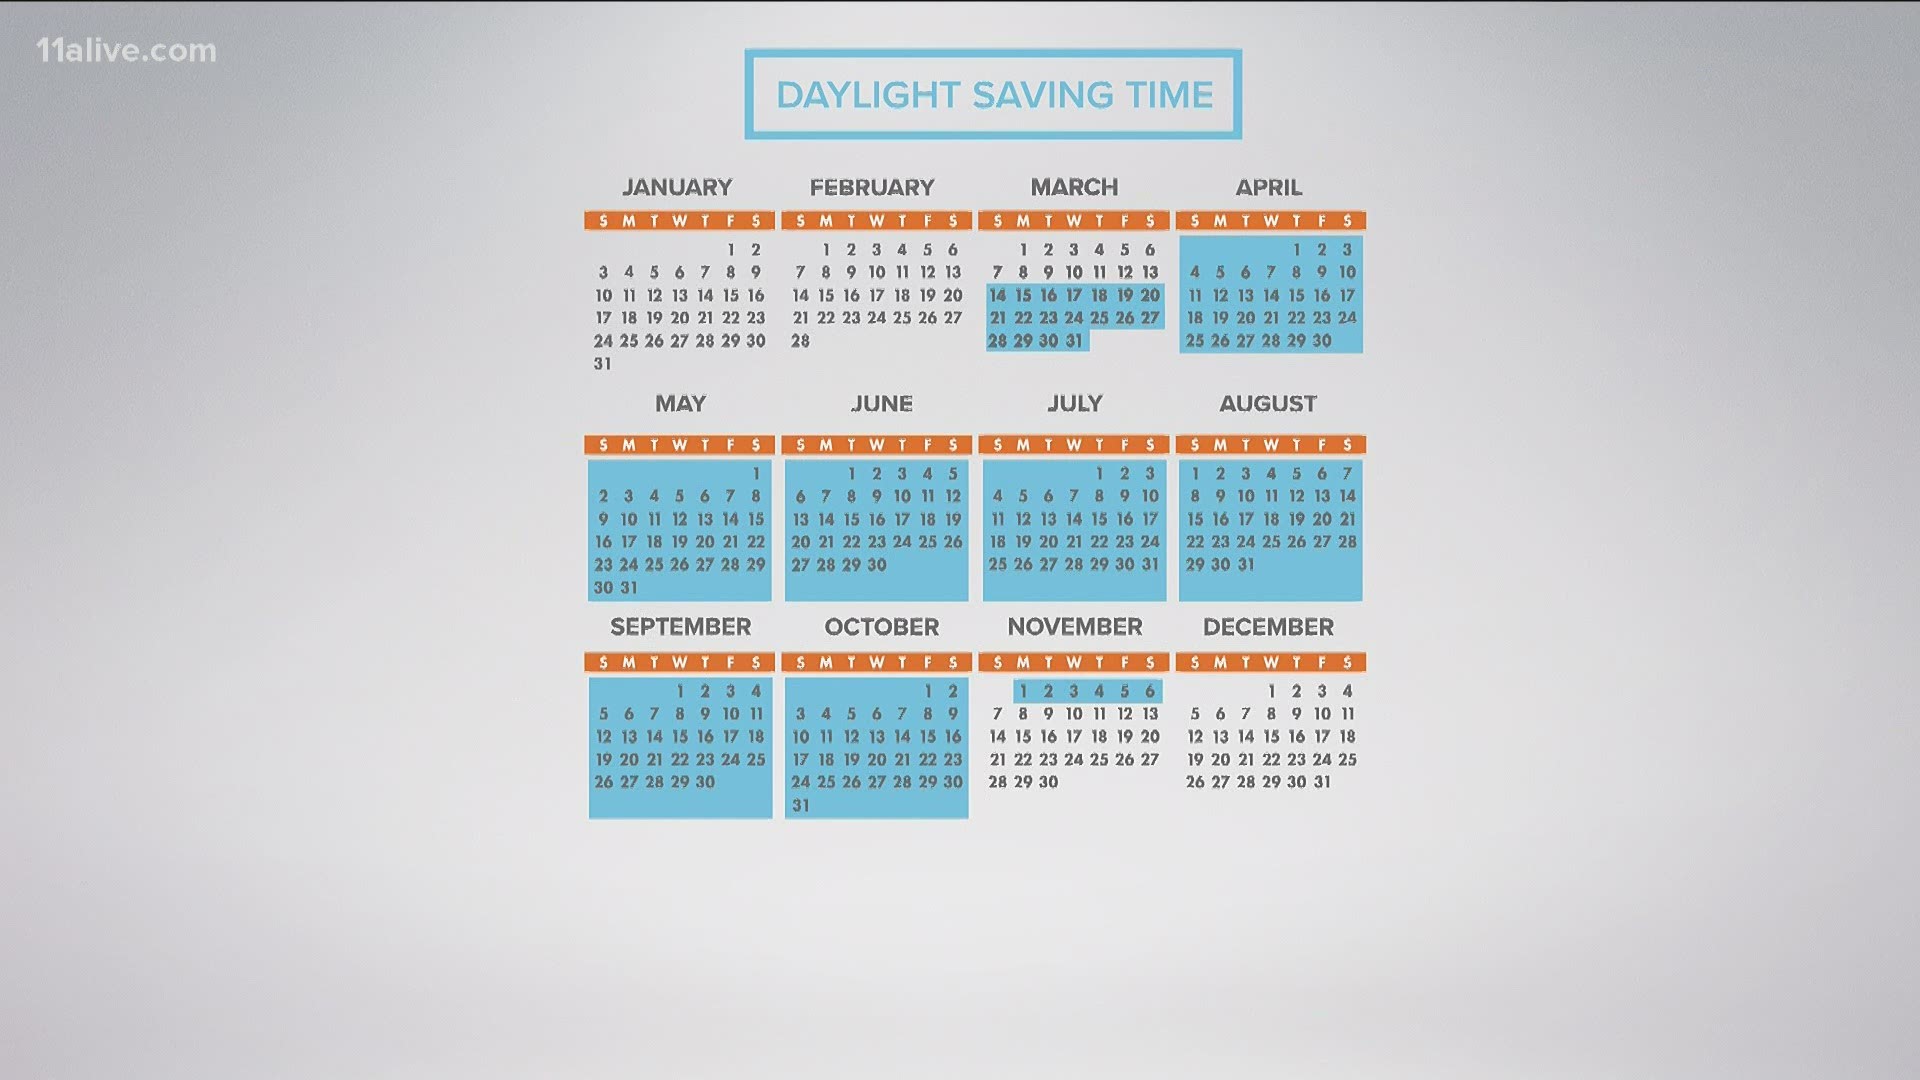 We spring ahead to daylight saving time in a month – but there are four bills in the legislature that would stop those twice-a-year time changes.